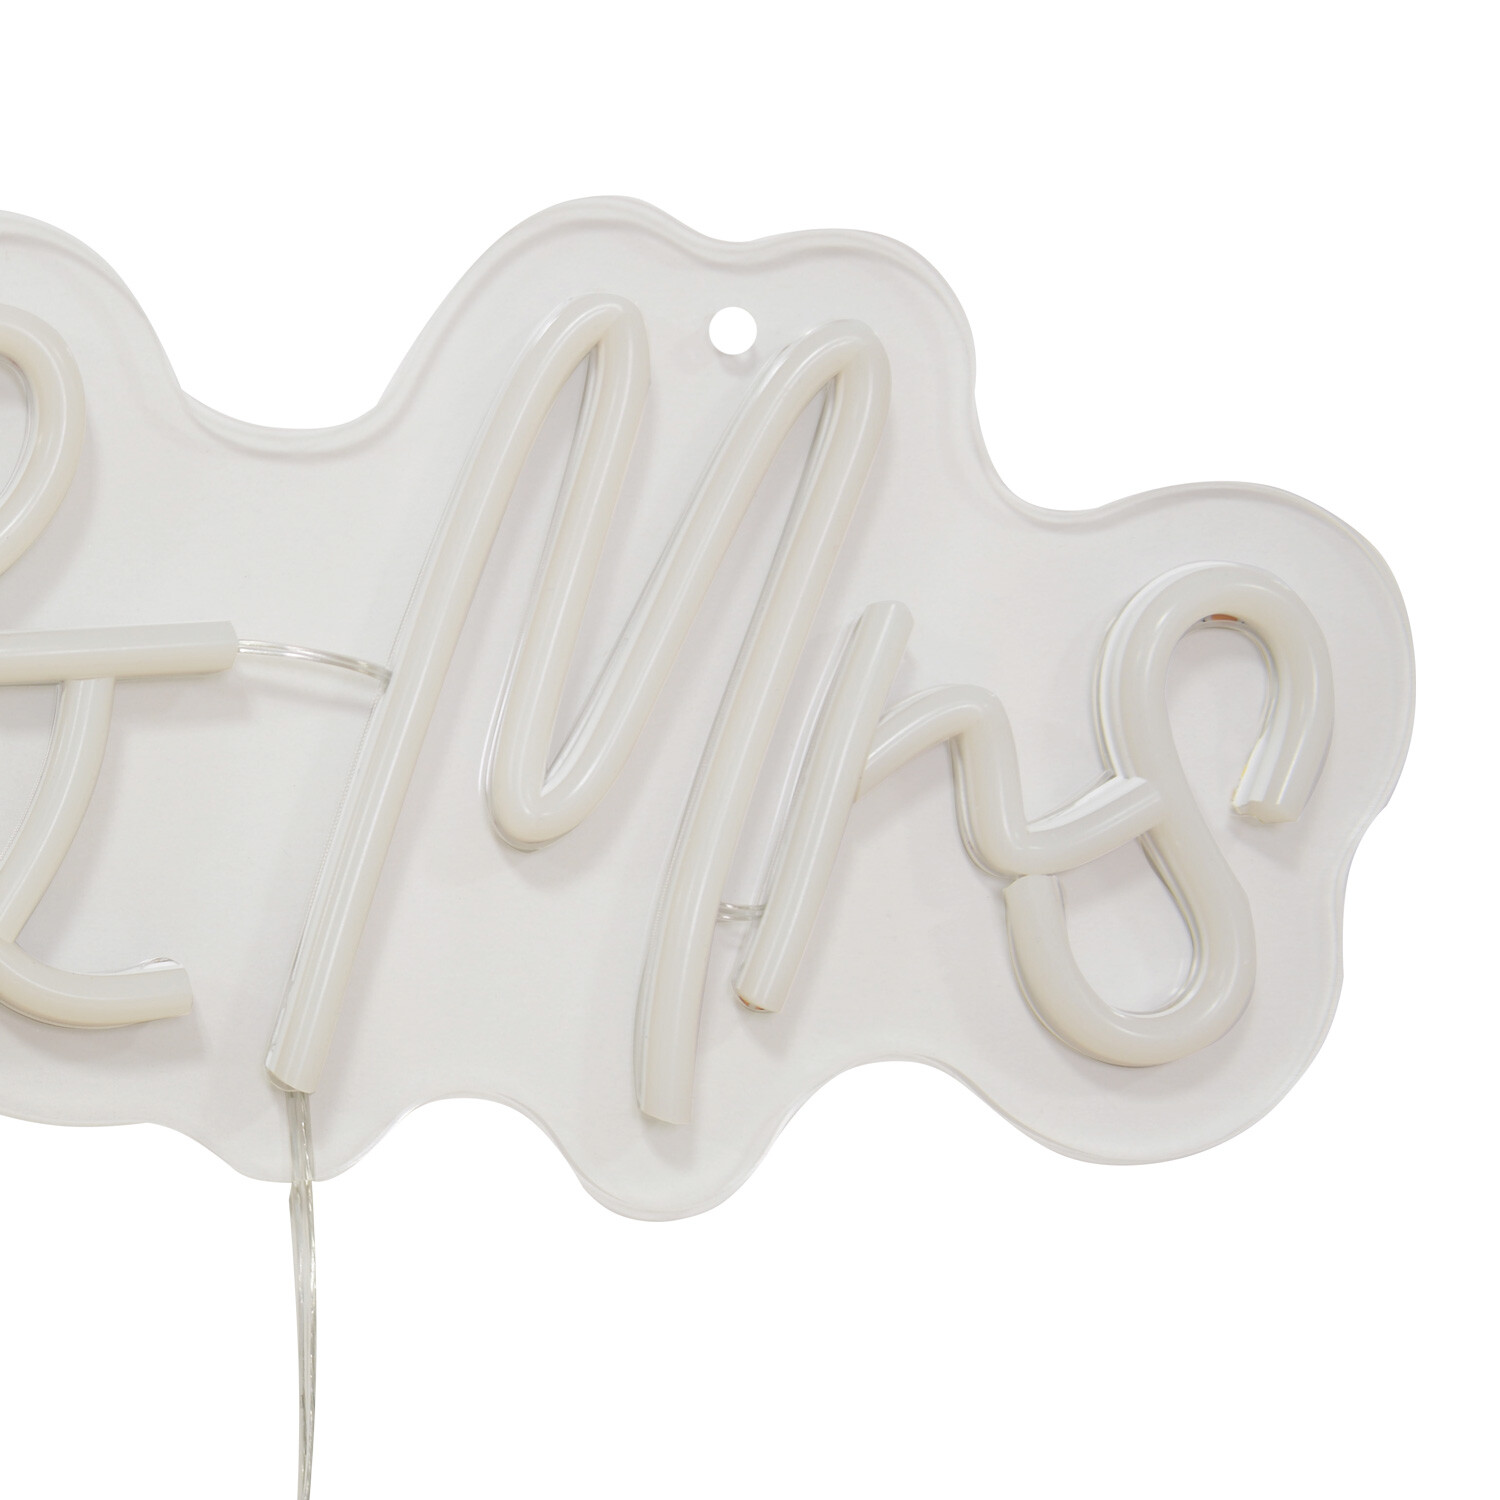 Mr and Mrs LED Neon Sign - White Image 4